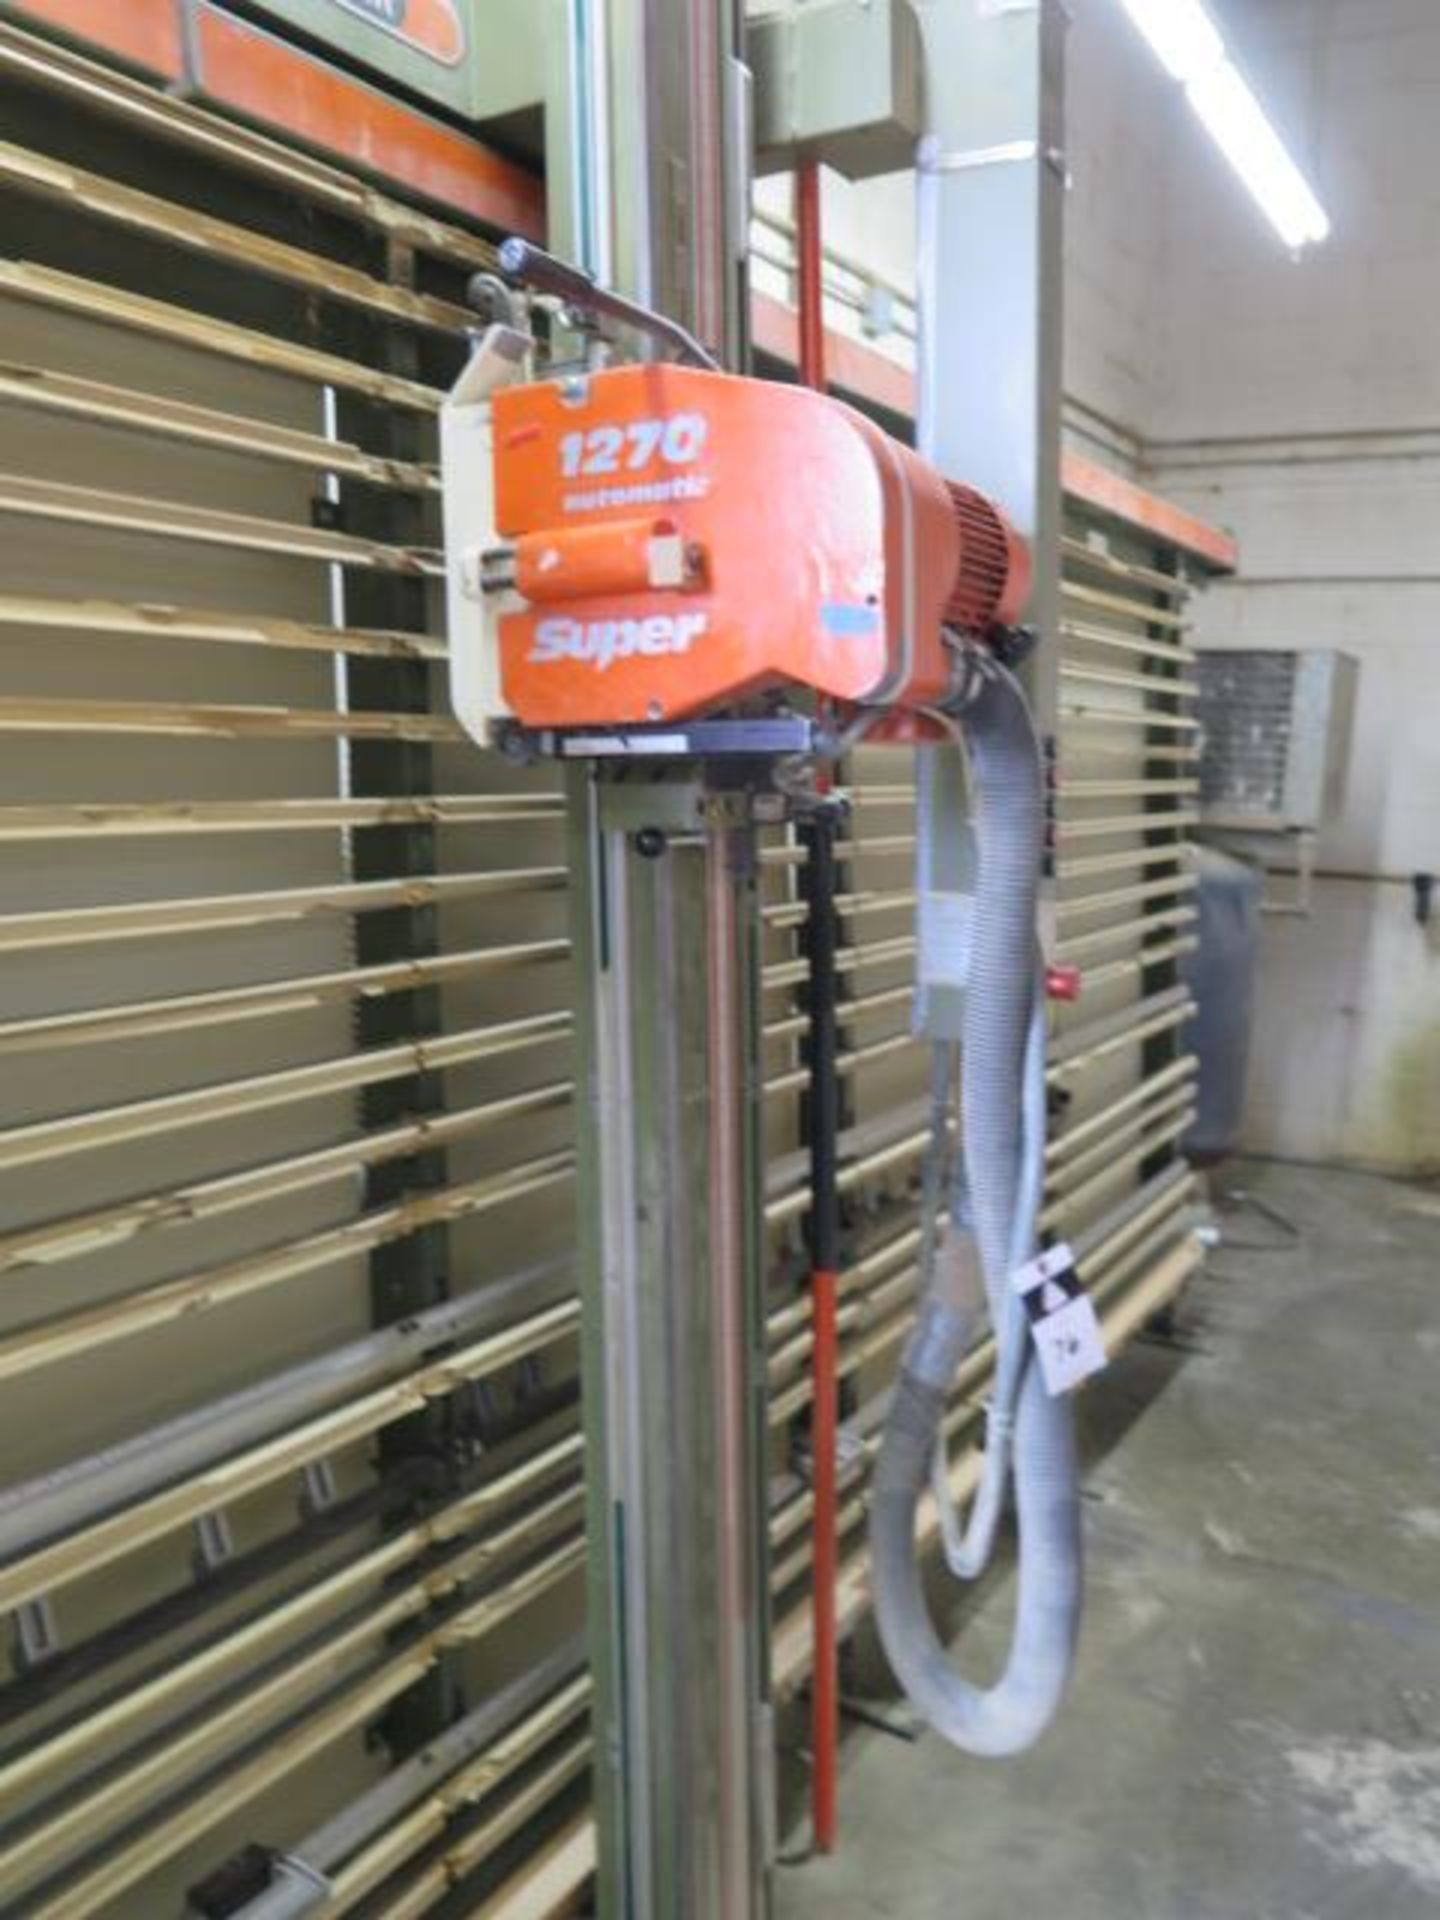 Holz-Her “Super 1270 Automatic” 10’ Vertical Panel Saw s/n 641 (SOLD AS-IS - NO WARRANTY) - Image 4 of 11